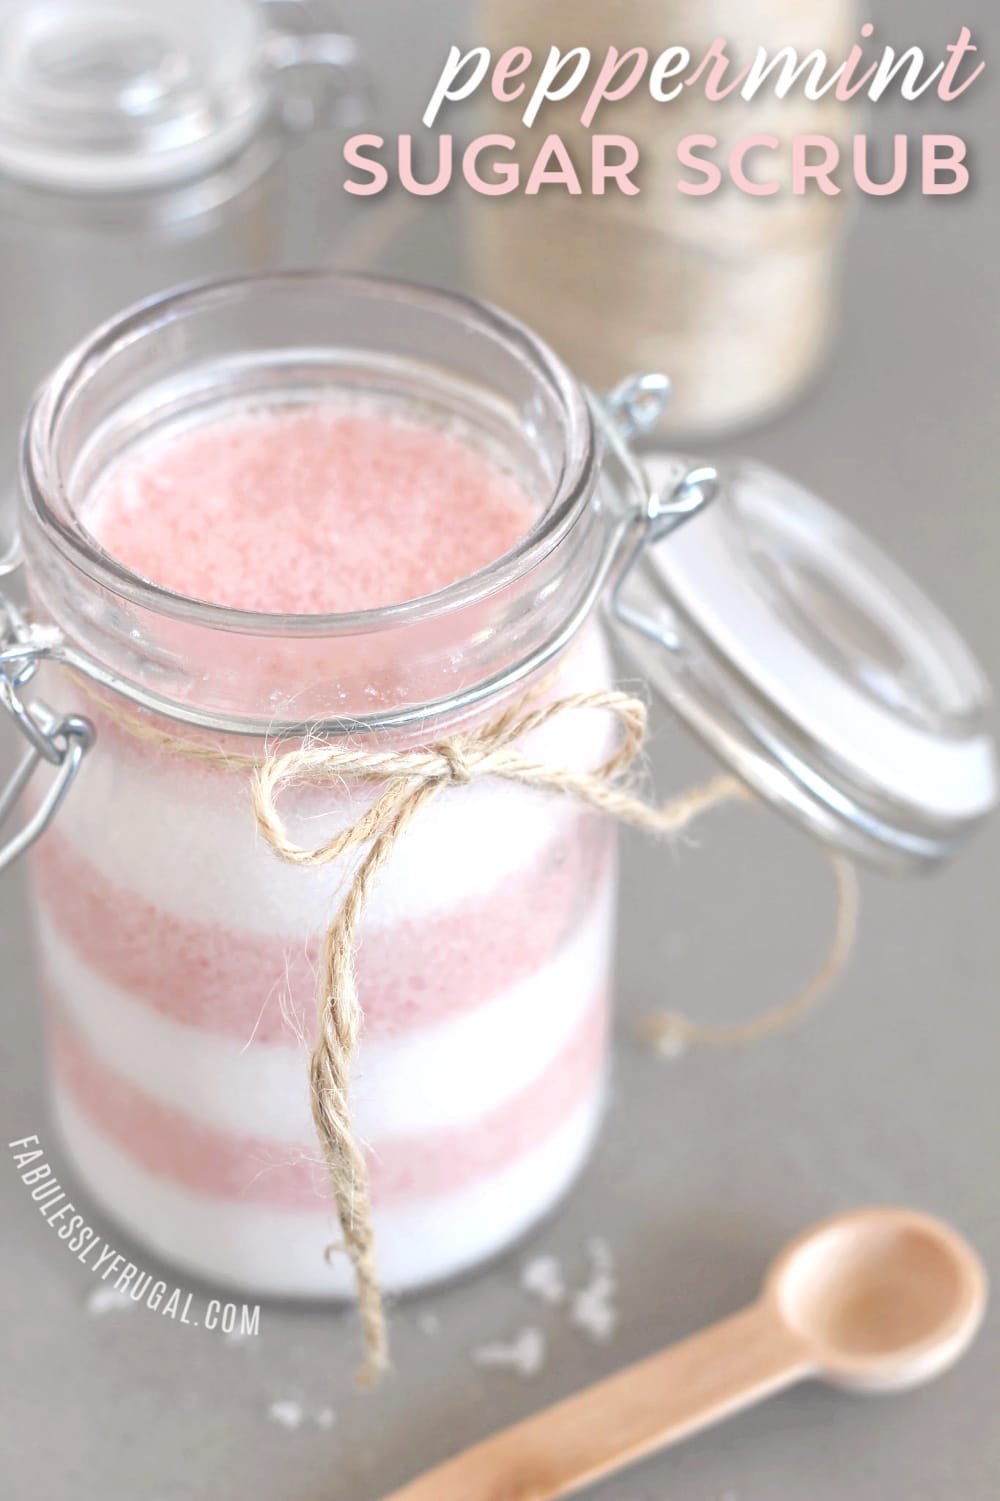 Layered candy cane sugar scrub in jar with twine and wooden spoon